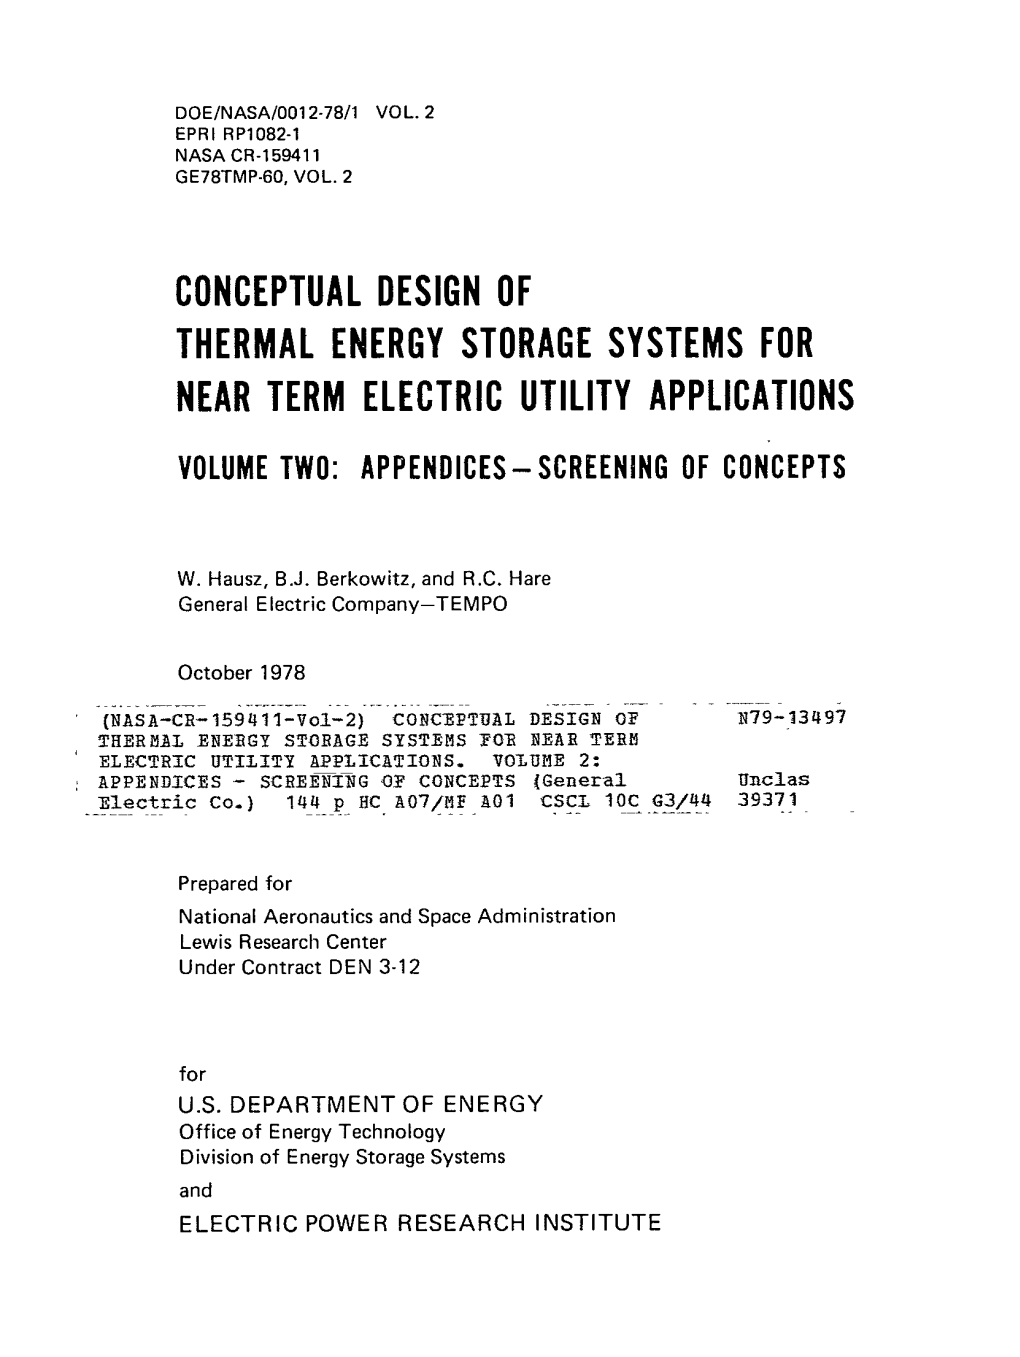 Conceptual Design of Thermal Energy Storage Systems for Near Term Electric Utility Applications Volume Two: Appendices-Screening of Concepts